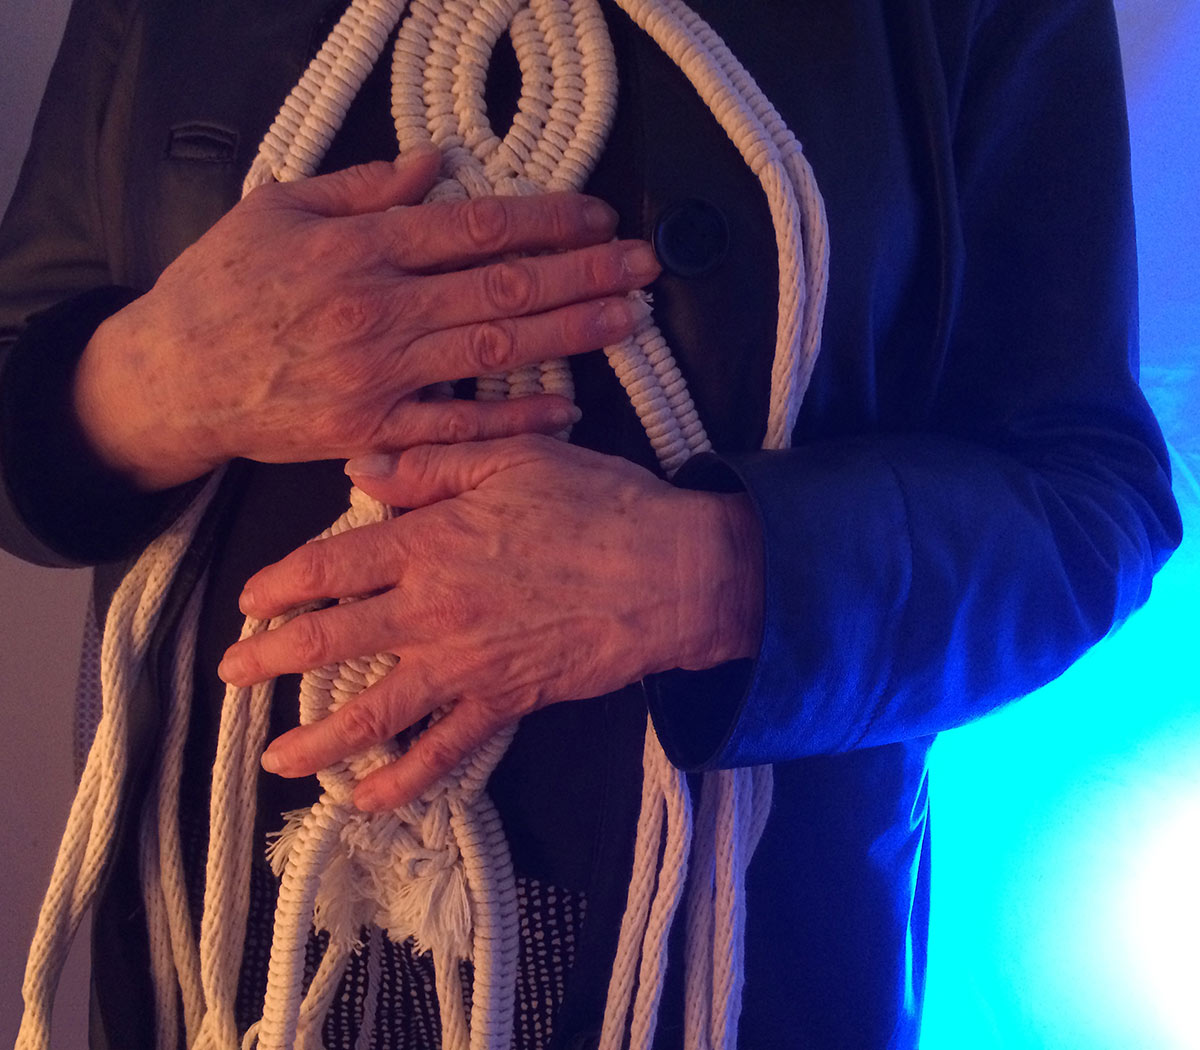 a person clutching a crocheted rope